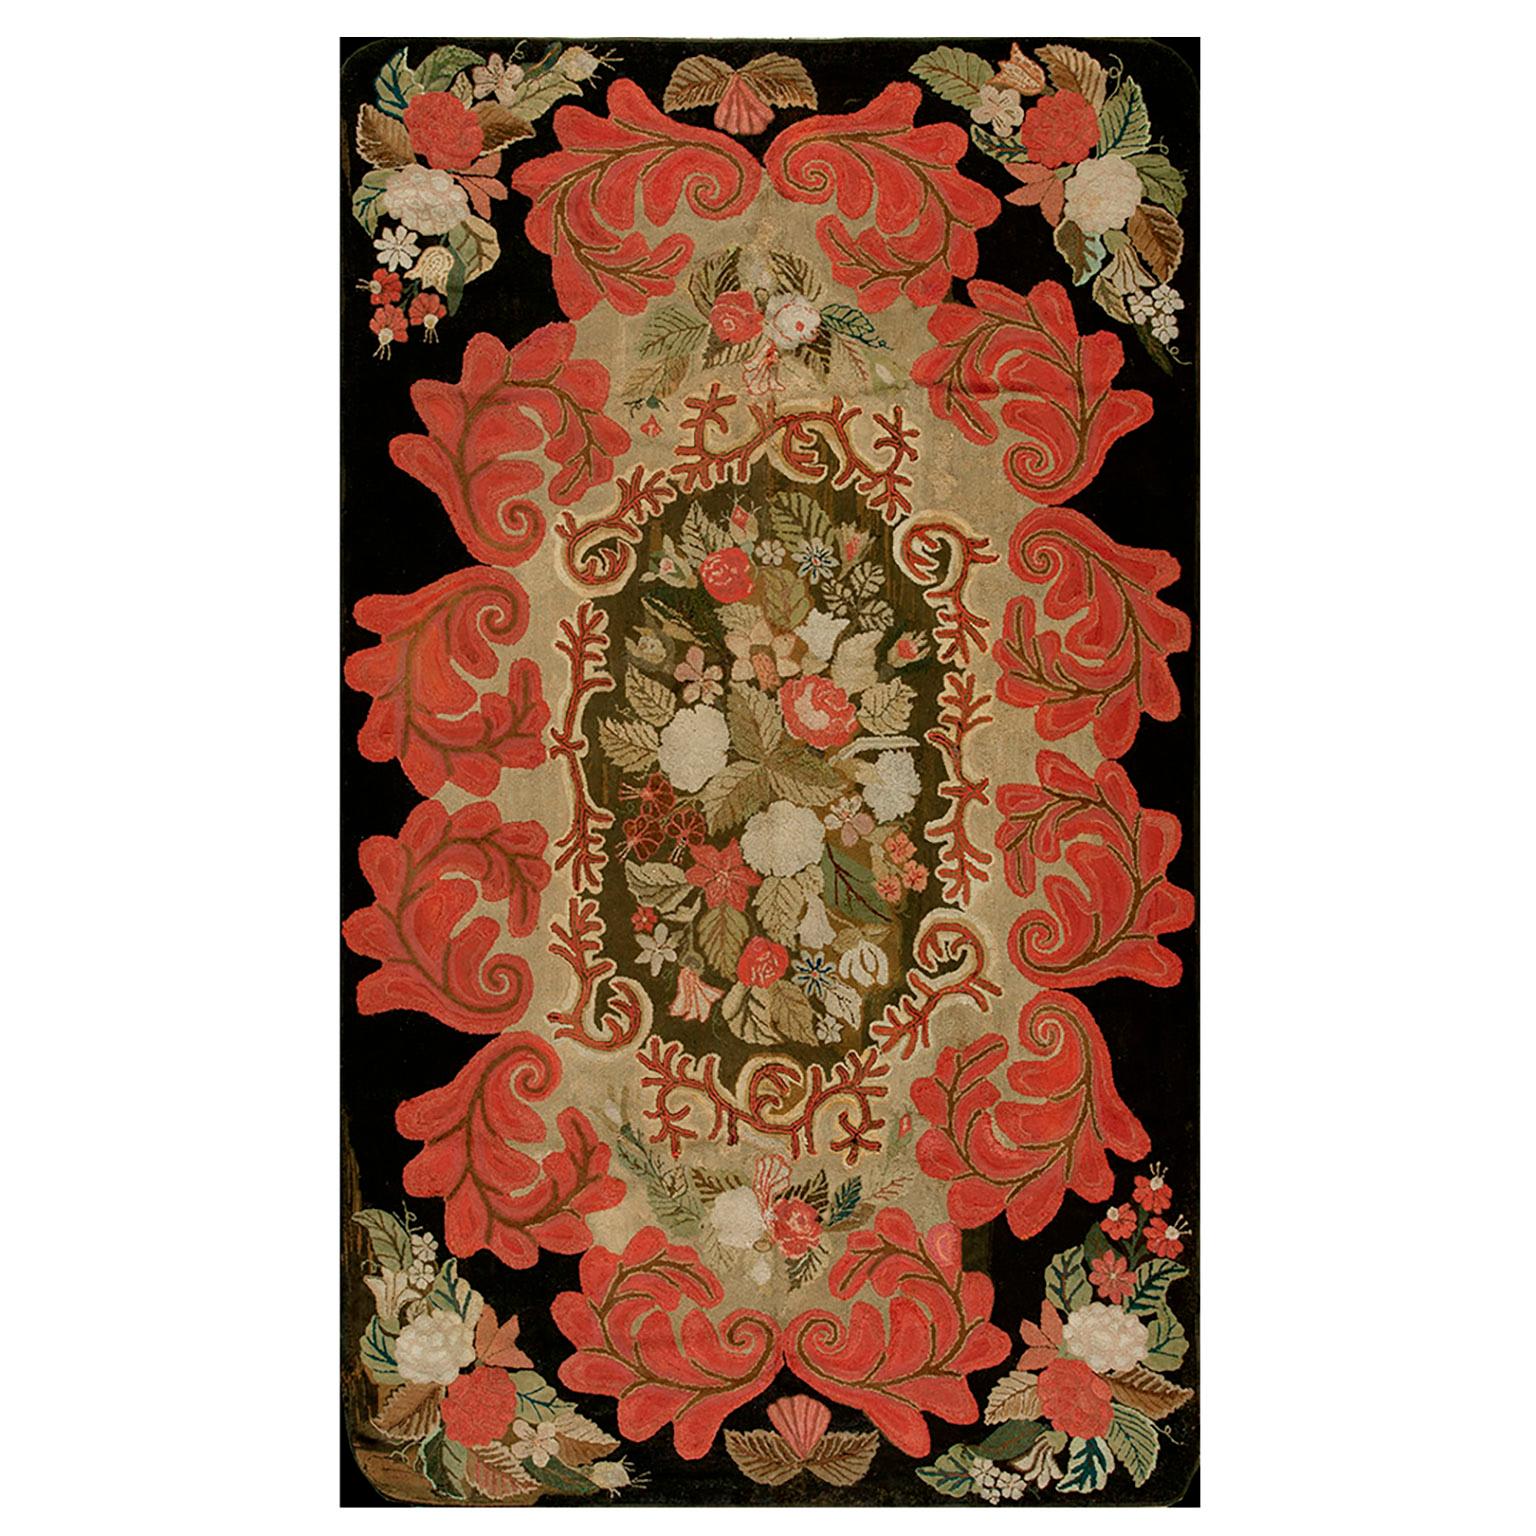 19th Century American Hooked Rug ( 6'2" x 10'6" - 188 x 320 ) For Sale